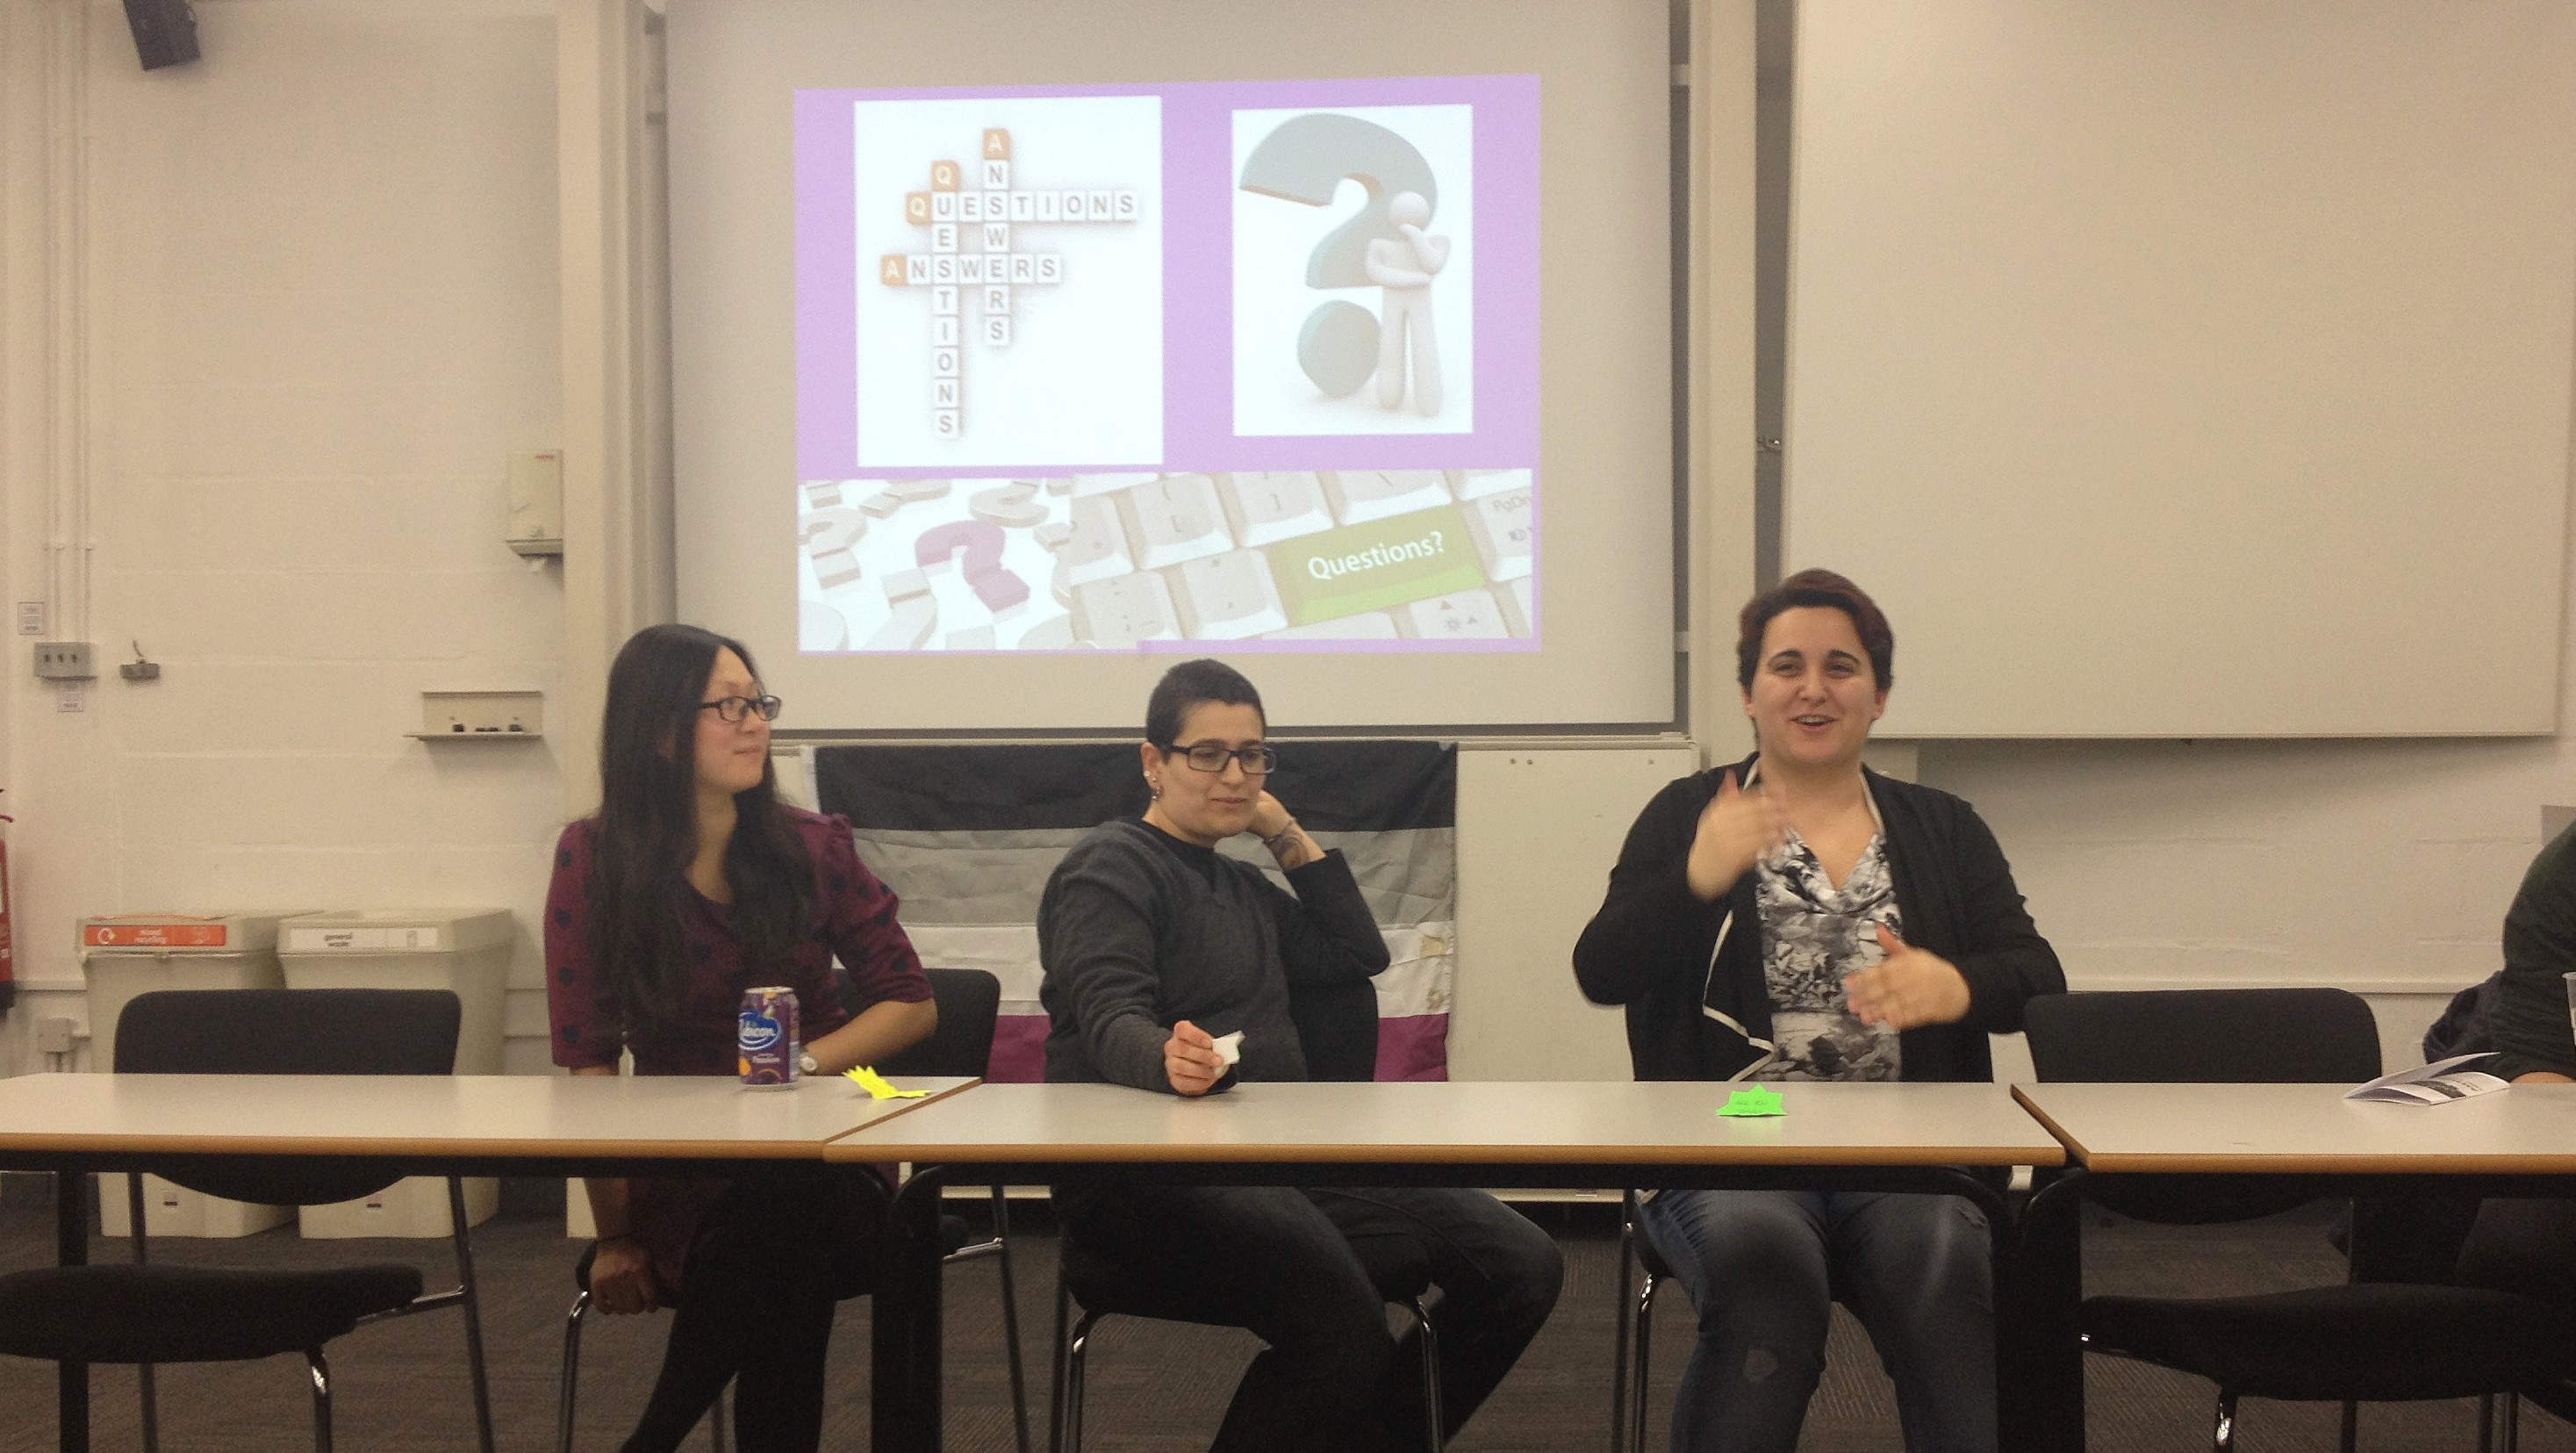 Kingston University students learn about asexuality